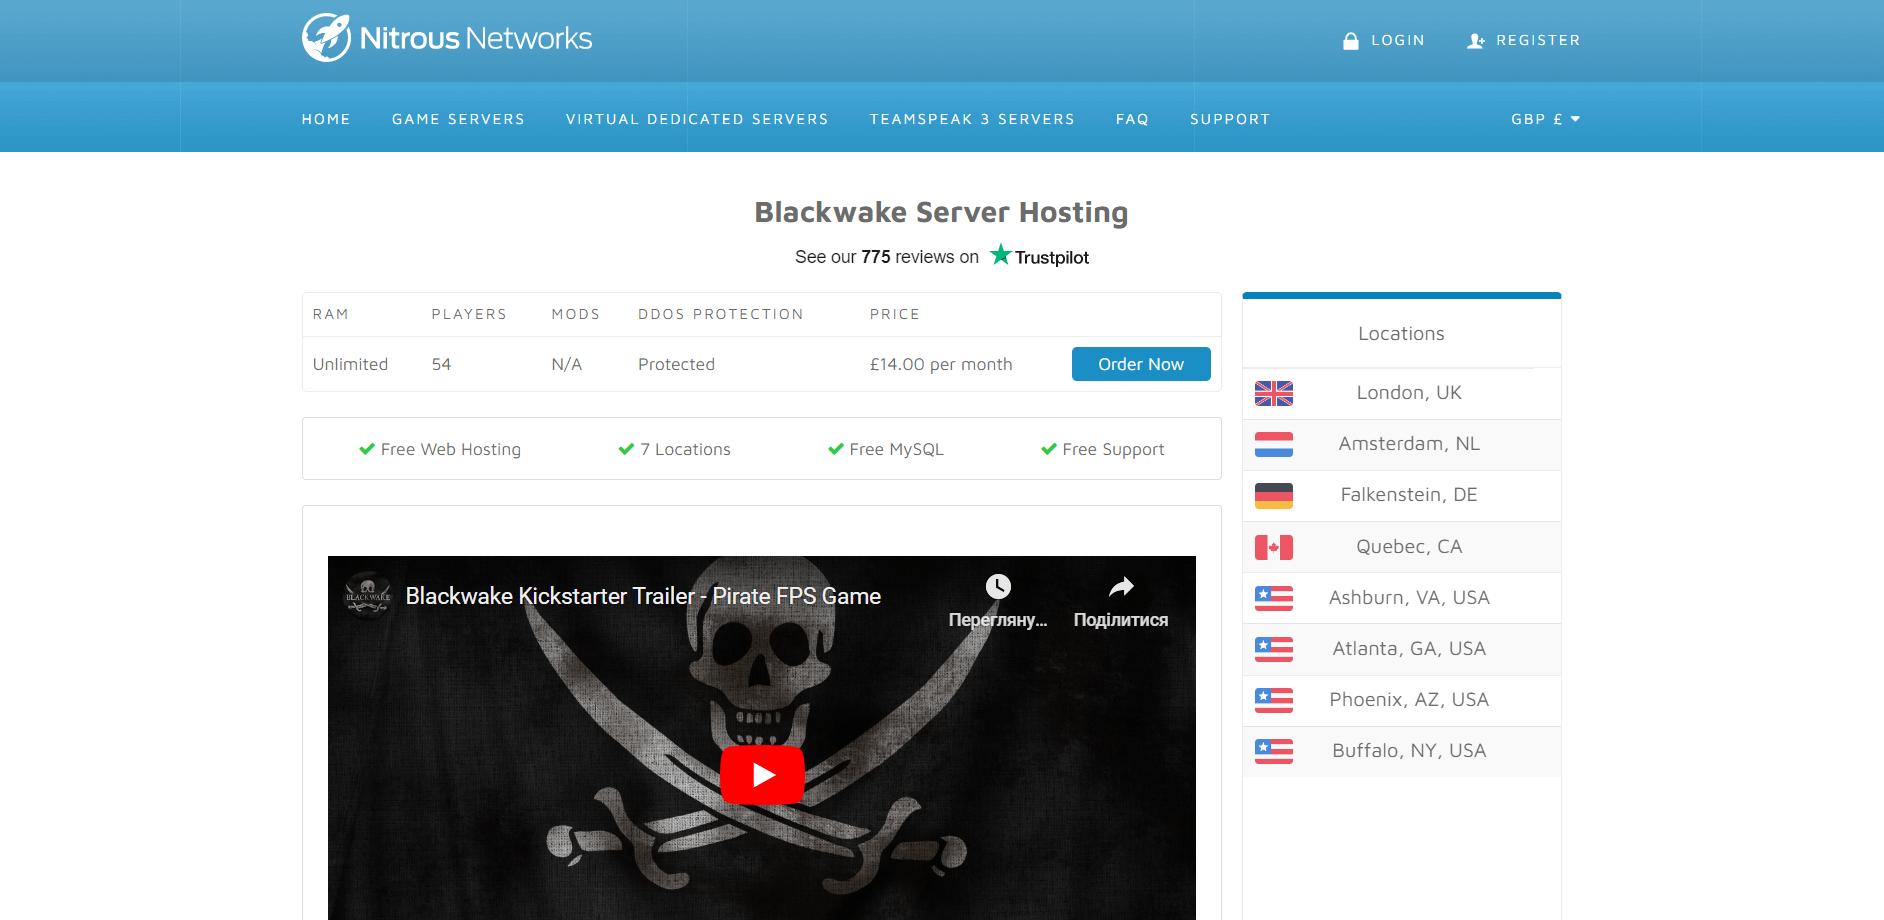 Nitrous Networks is one of the most popular Blackwake server hosting providers